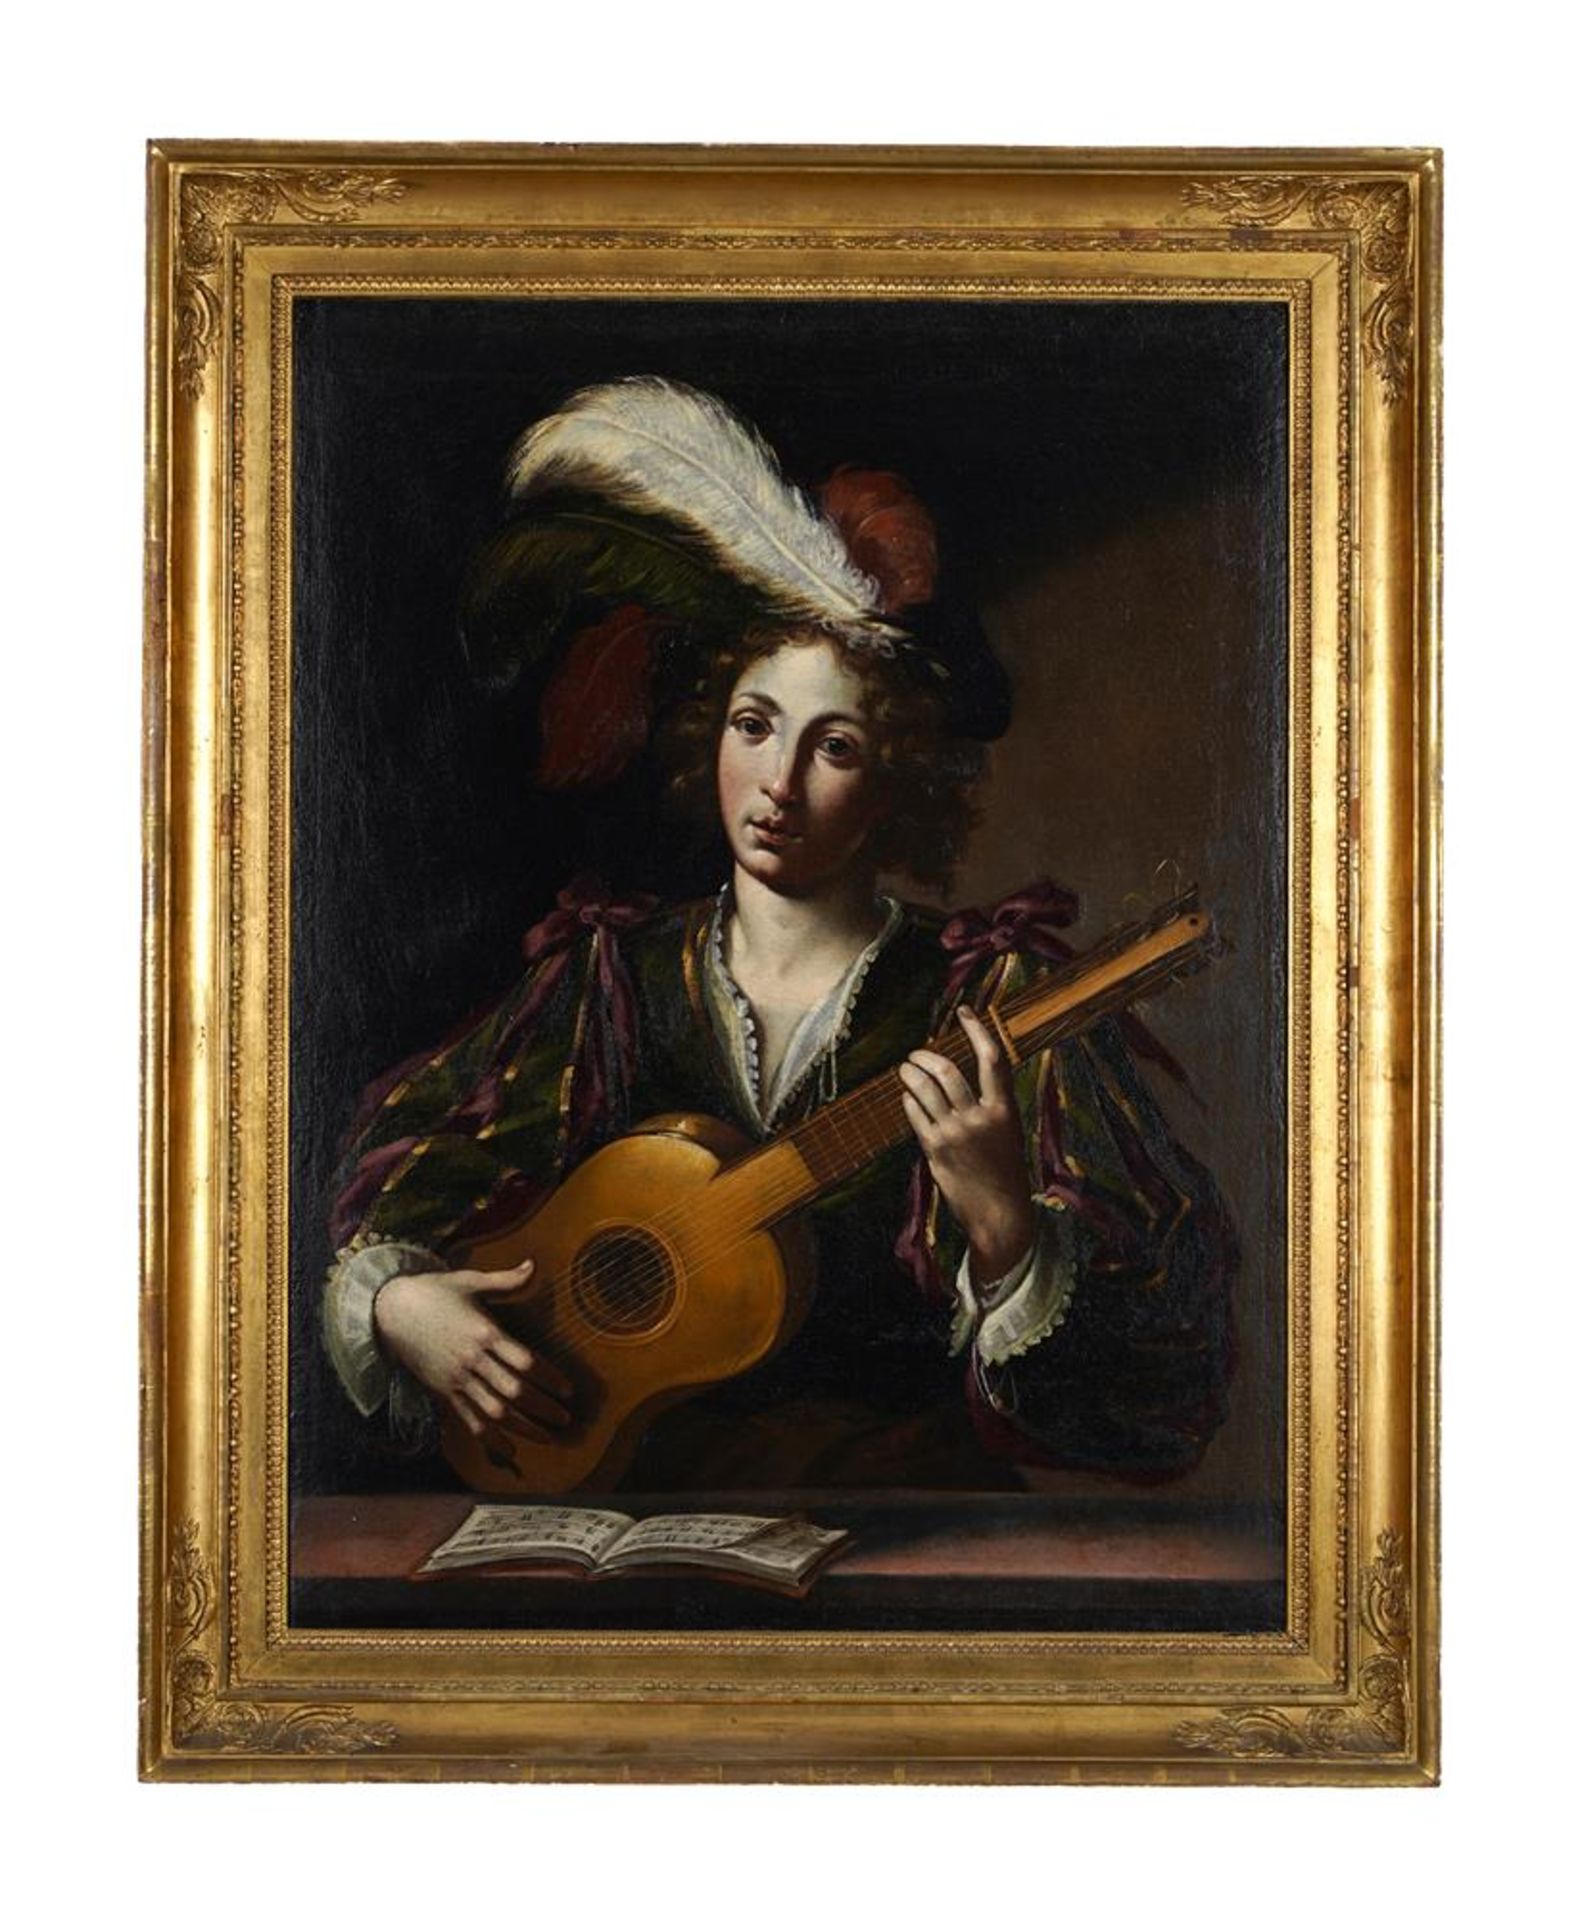 CIRCLE OF CLAUDE VIGNON (FRENCH 1593-1670), A YOUNG MAN PLAYING THE GUITAR - Image 2 of 3